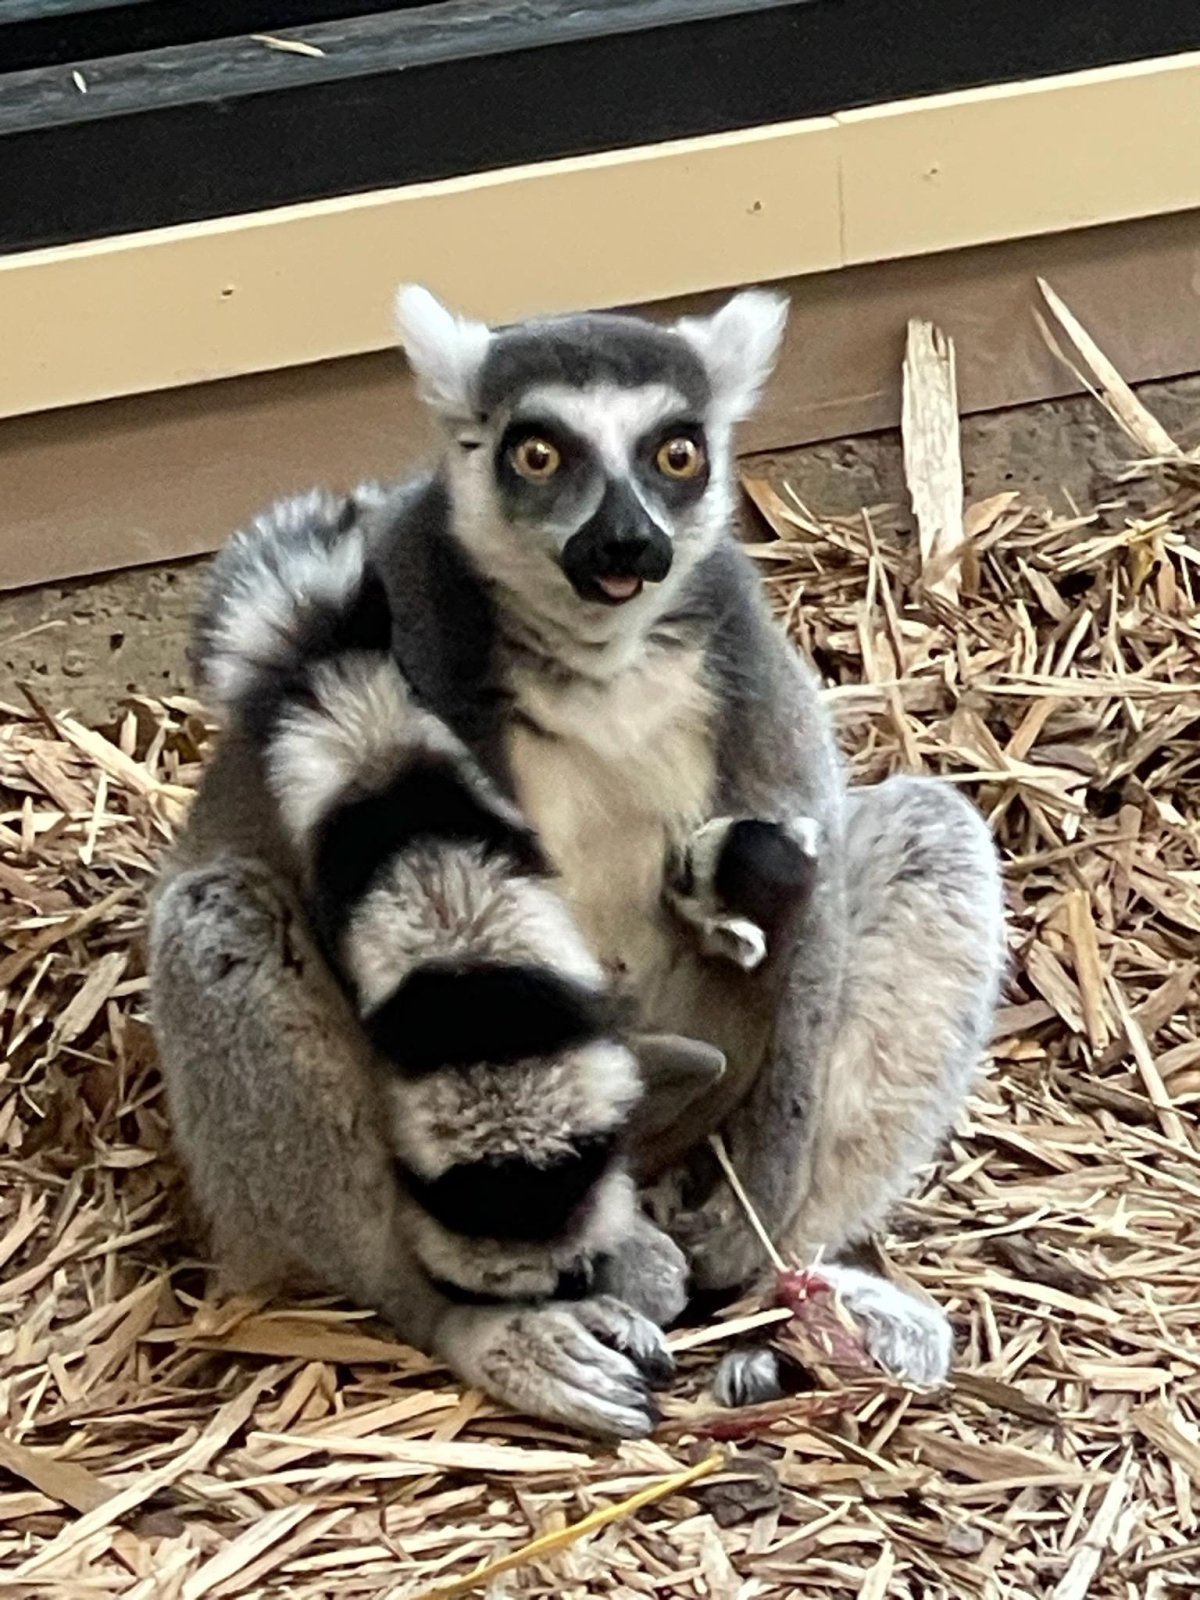 The lemur's mother, Lucy, will let the baby cling to her belly for the first few weeks before moving it to her back, according to a release from the zoo. .